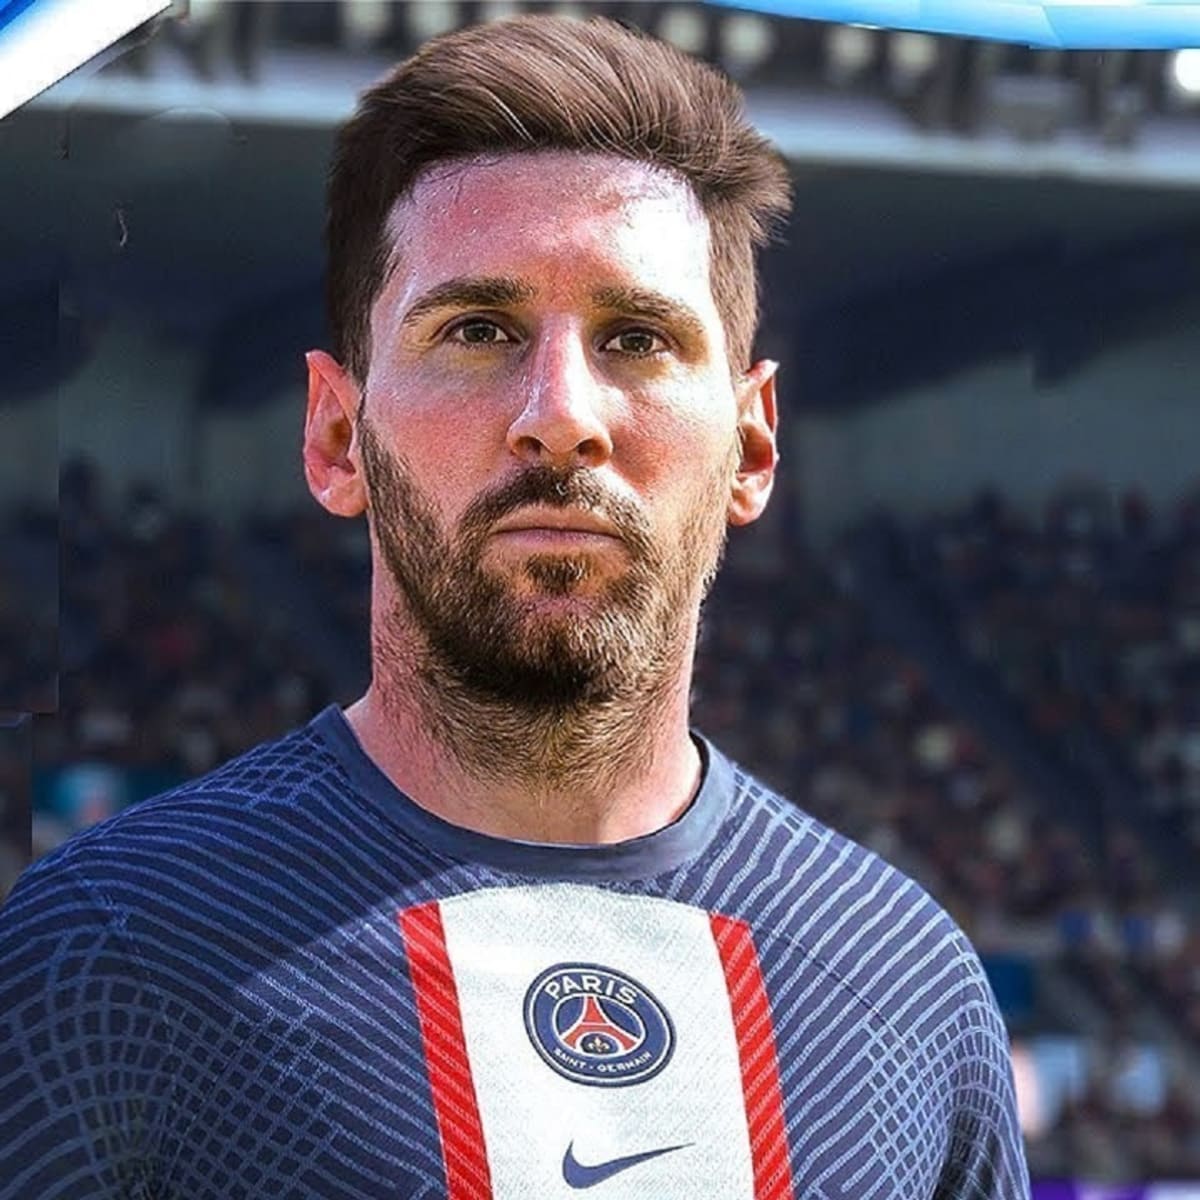 Electronic Arts - Play FIFA 23 for free this FIFA World Cup™ Final